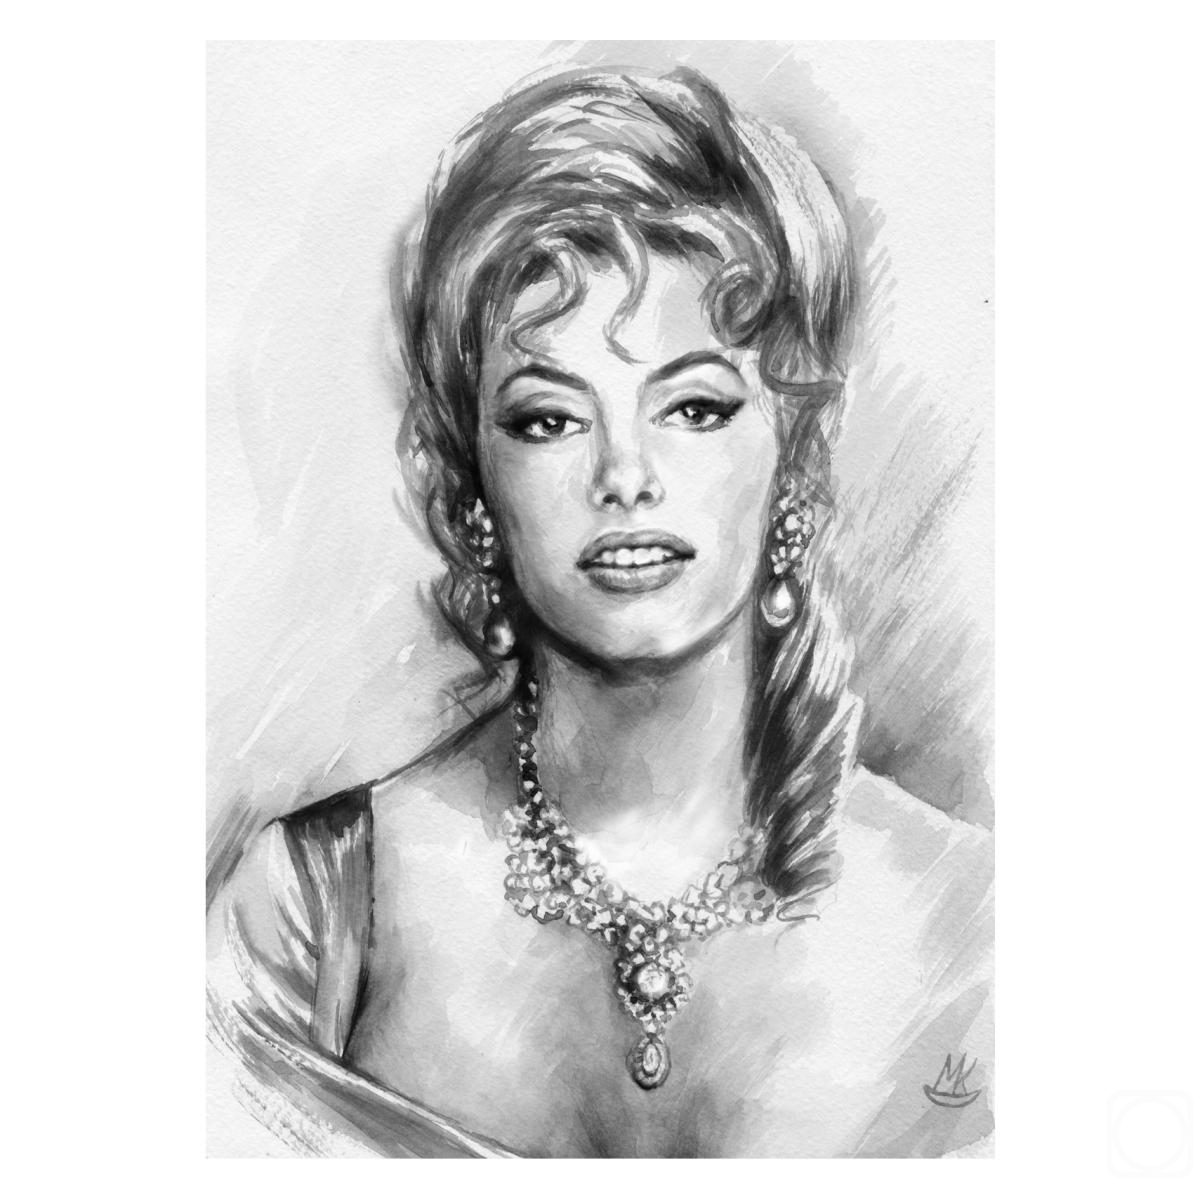 Kozlova Mariya. Black and white watercolor portrait of actress Michel Mercier as Angelique from the movie "Angelique"